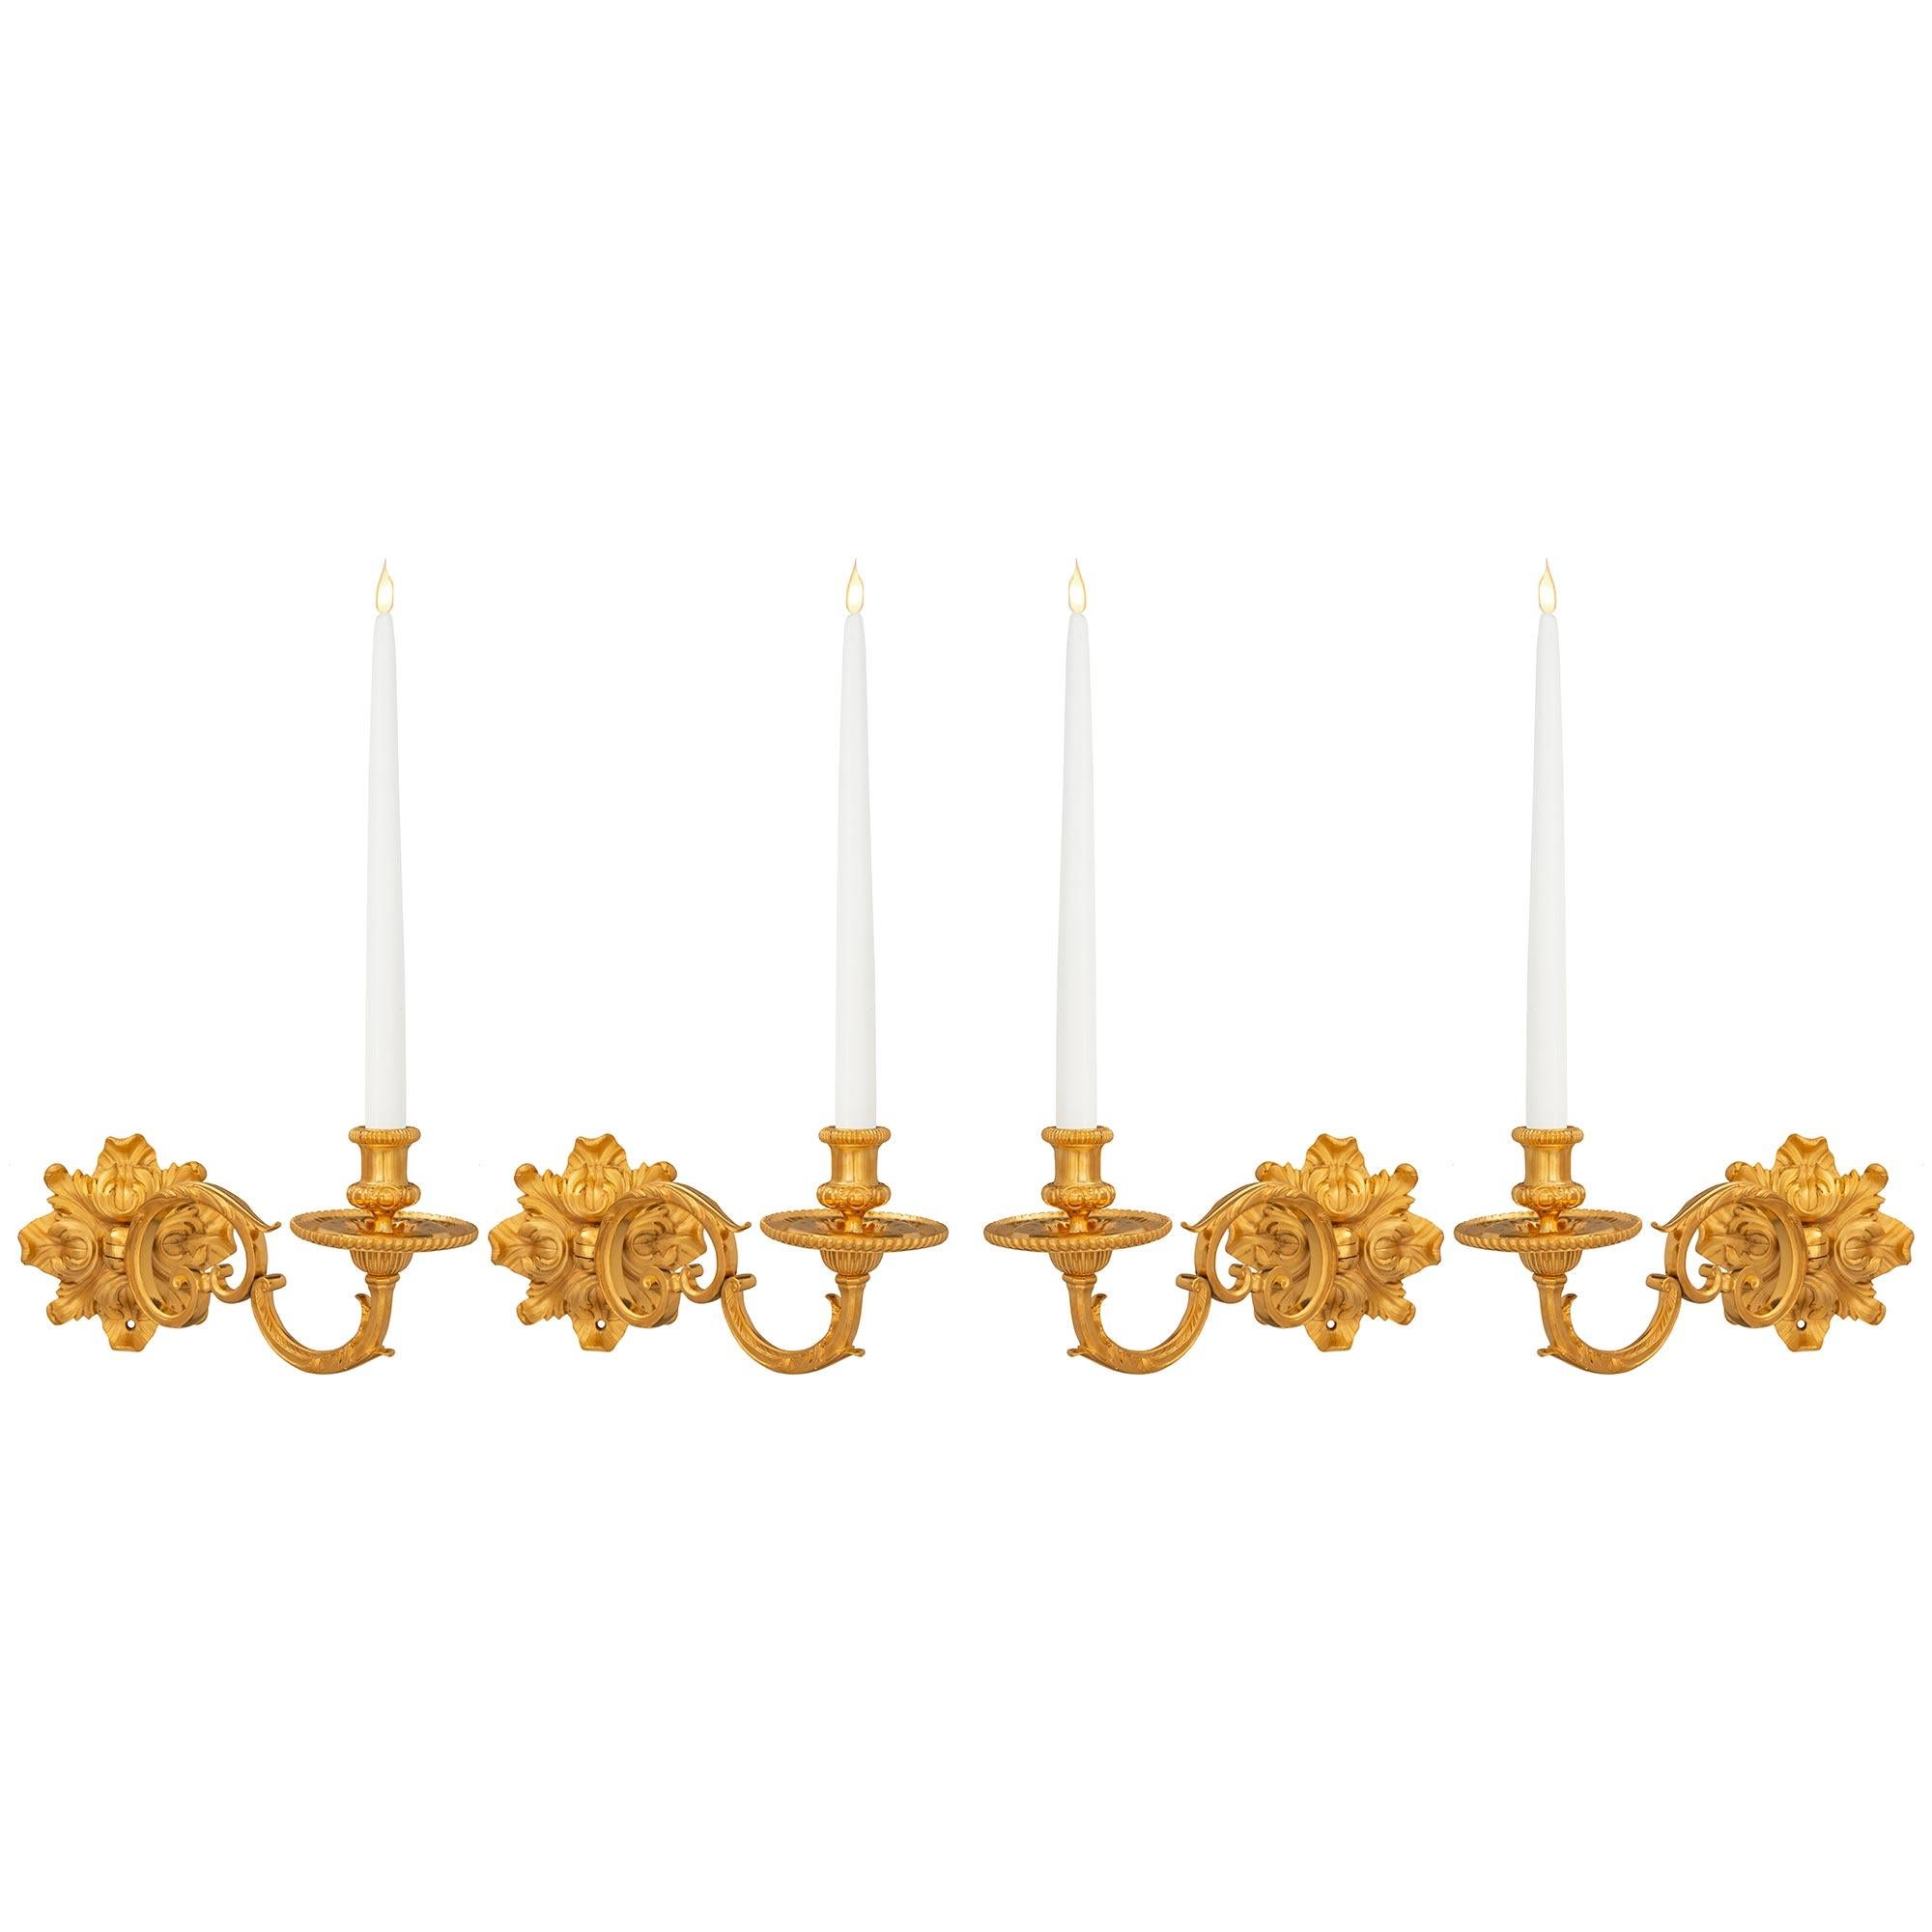 A beautiful set of four French 19th century Louis XVI st. ormolu sconces. Each one arm is centered by a wonderfully richly chased backplate with acanthus leaf designs in a superb satin and burnished finish. The elegantly scrolled arm is adorned with